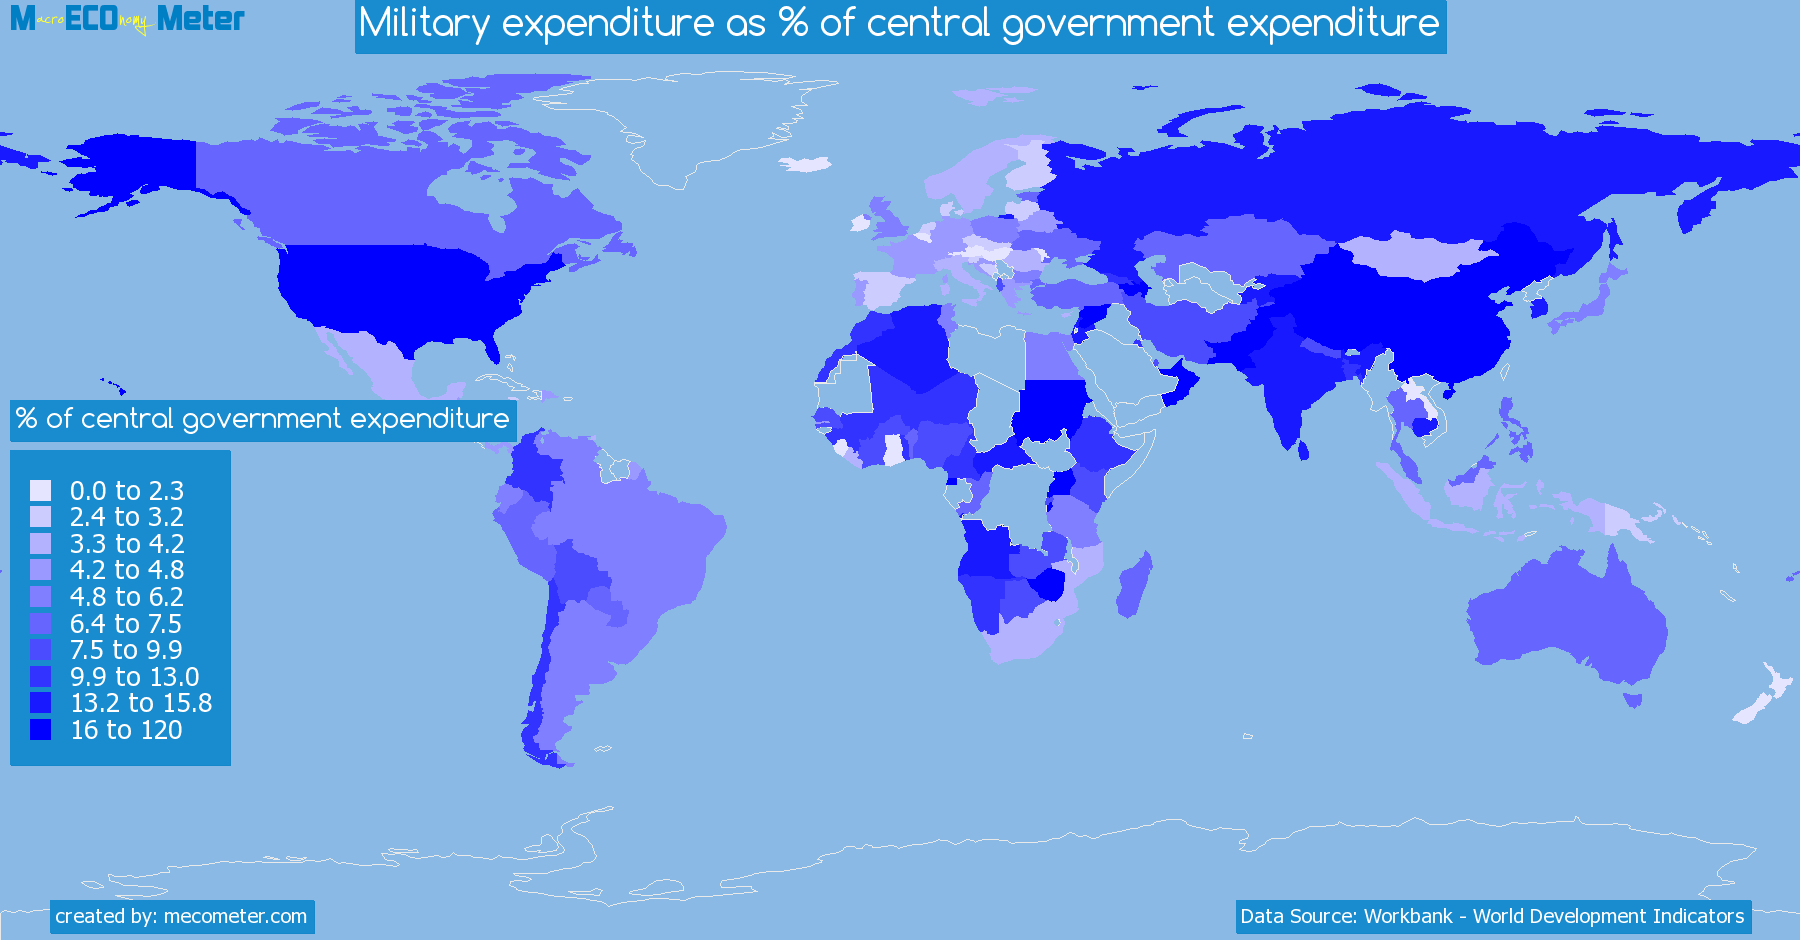 Military expenditure as % of central government expenditure